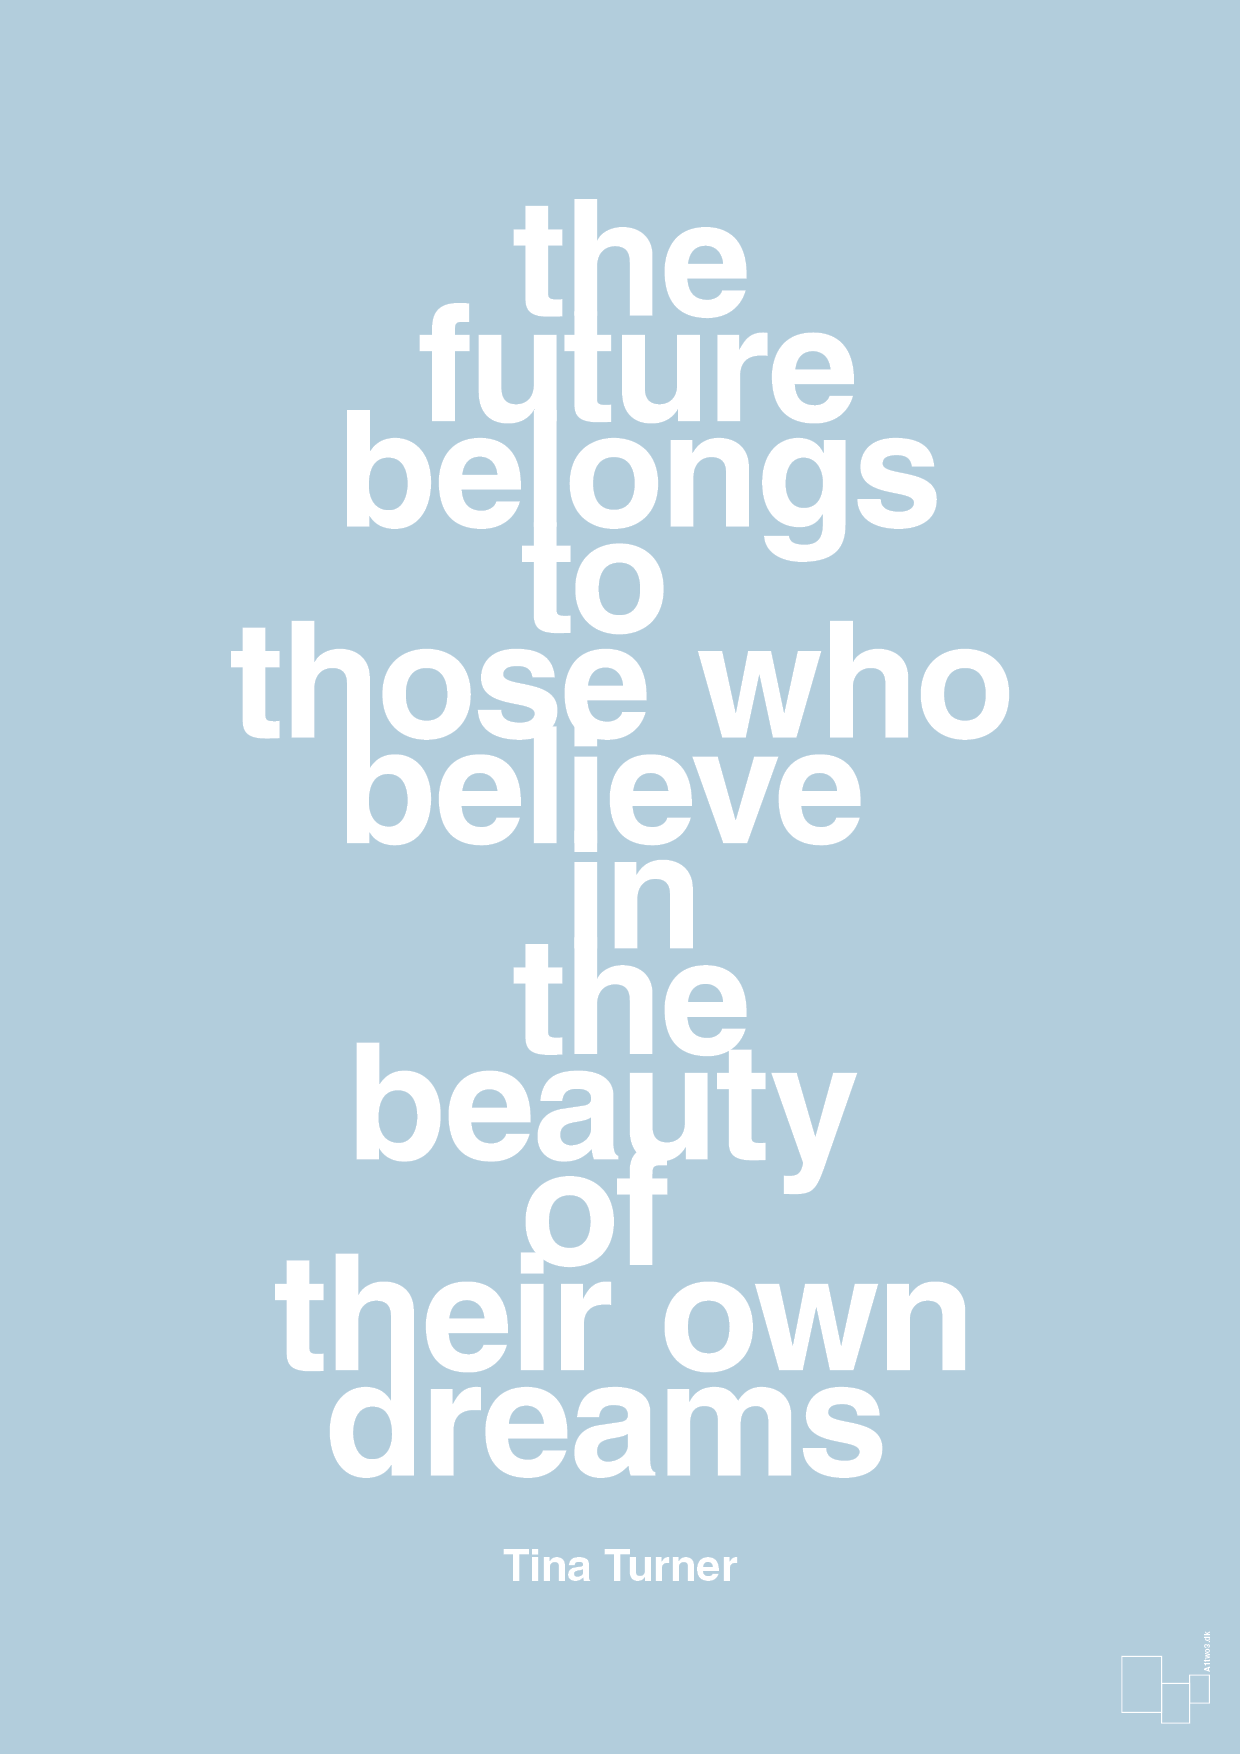 the future belongs to those who believe in the beauty of their own dreams - Plakat med Citater i Heavenly Blue